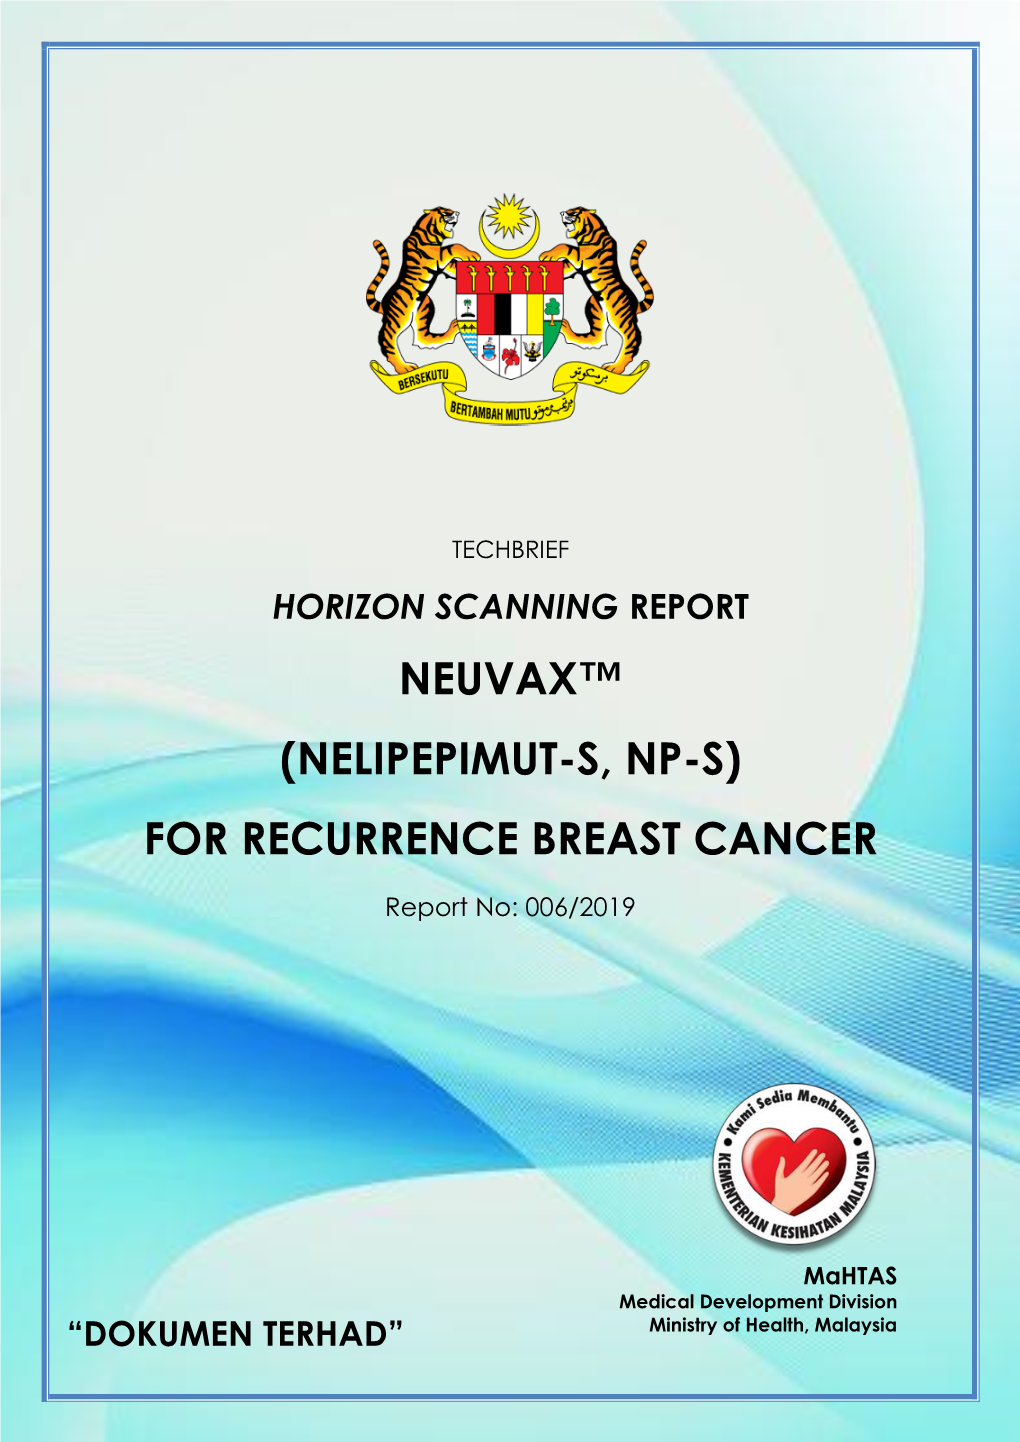 For Recurrence Breast Cancer